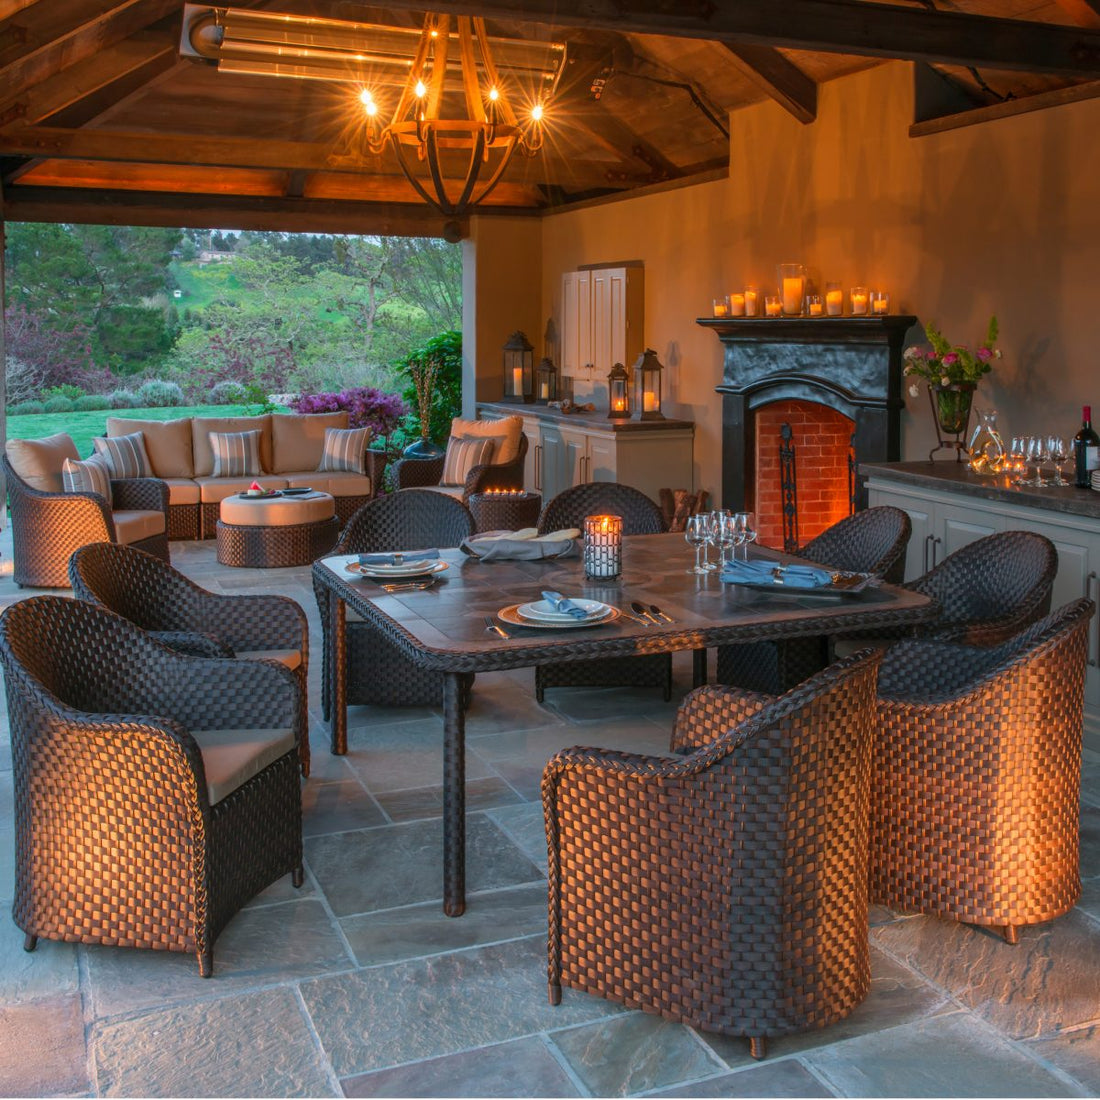 Top 5 Outdoor Entertainment Ideas You Can Try In Your Backyard